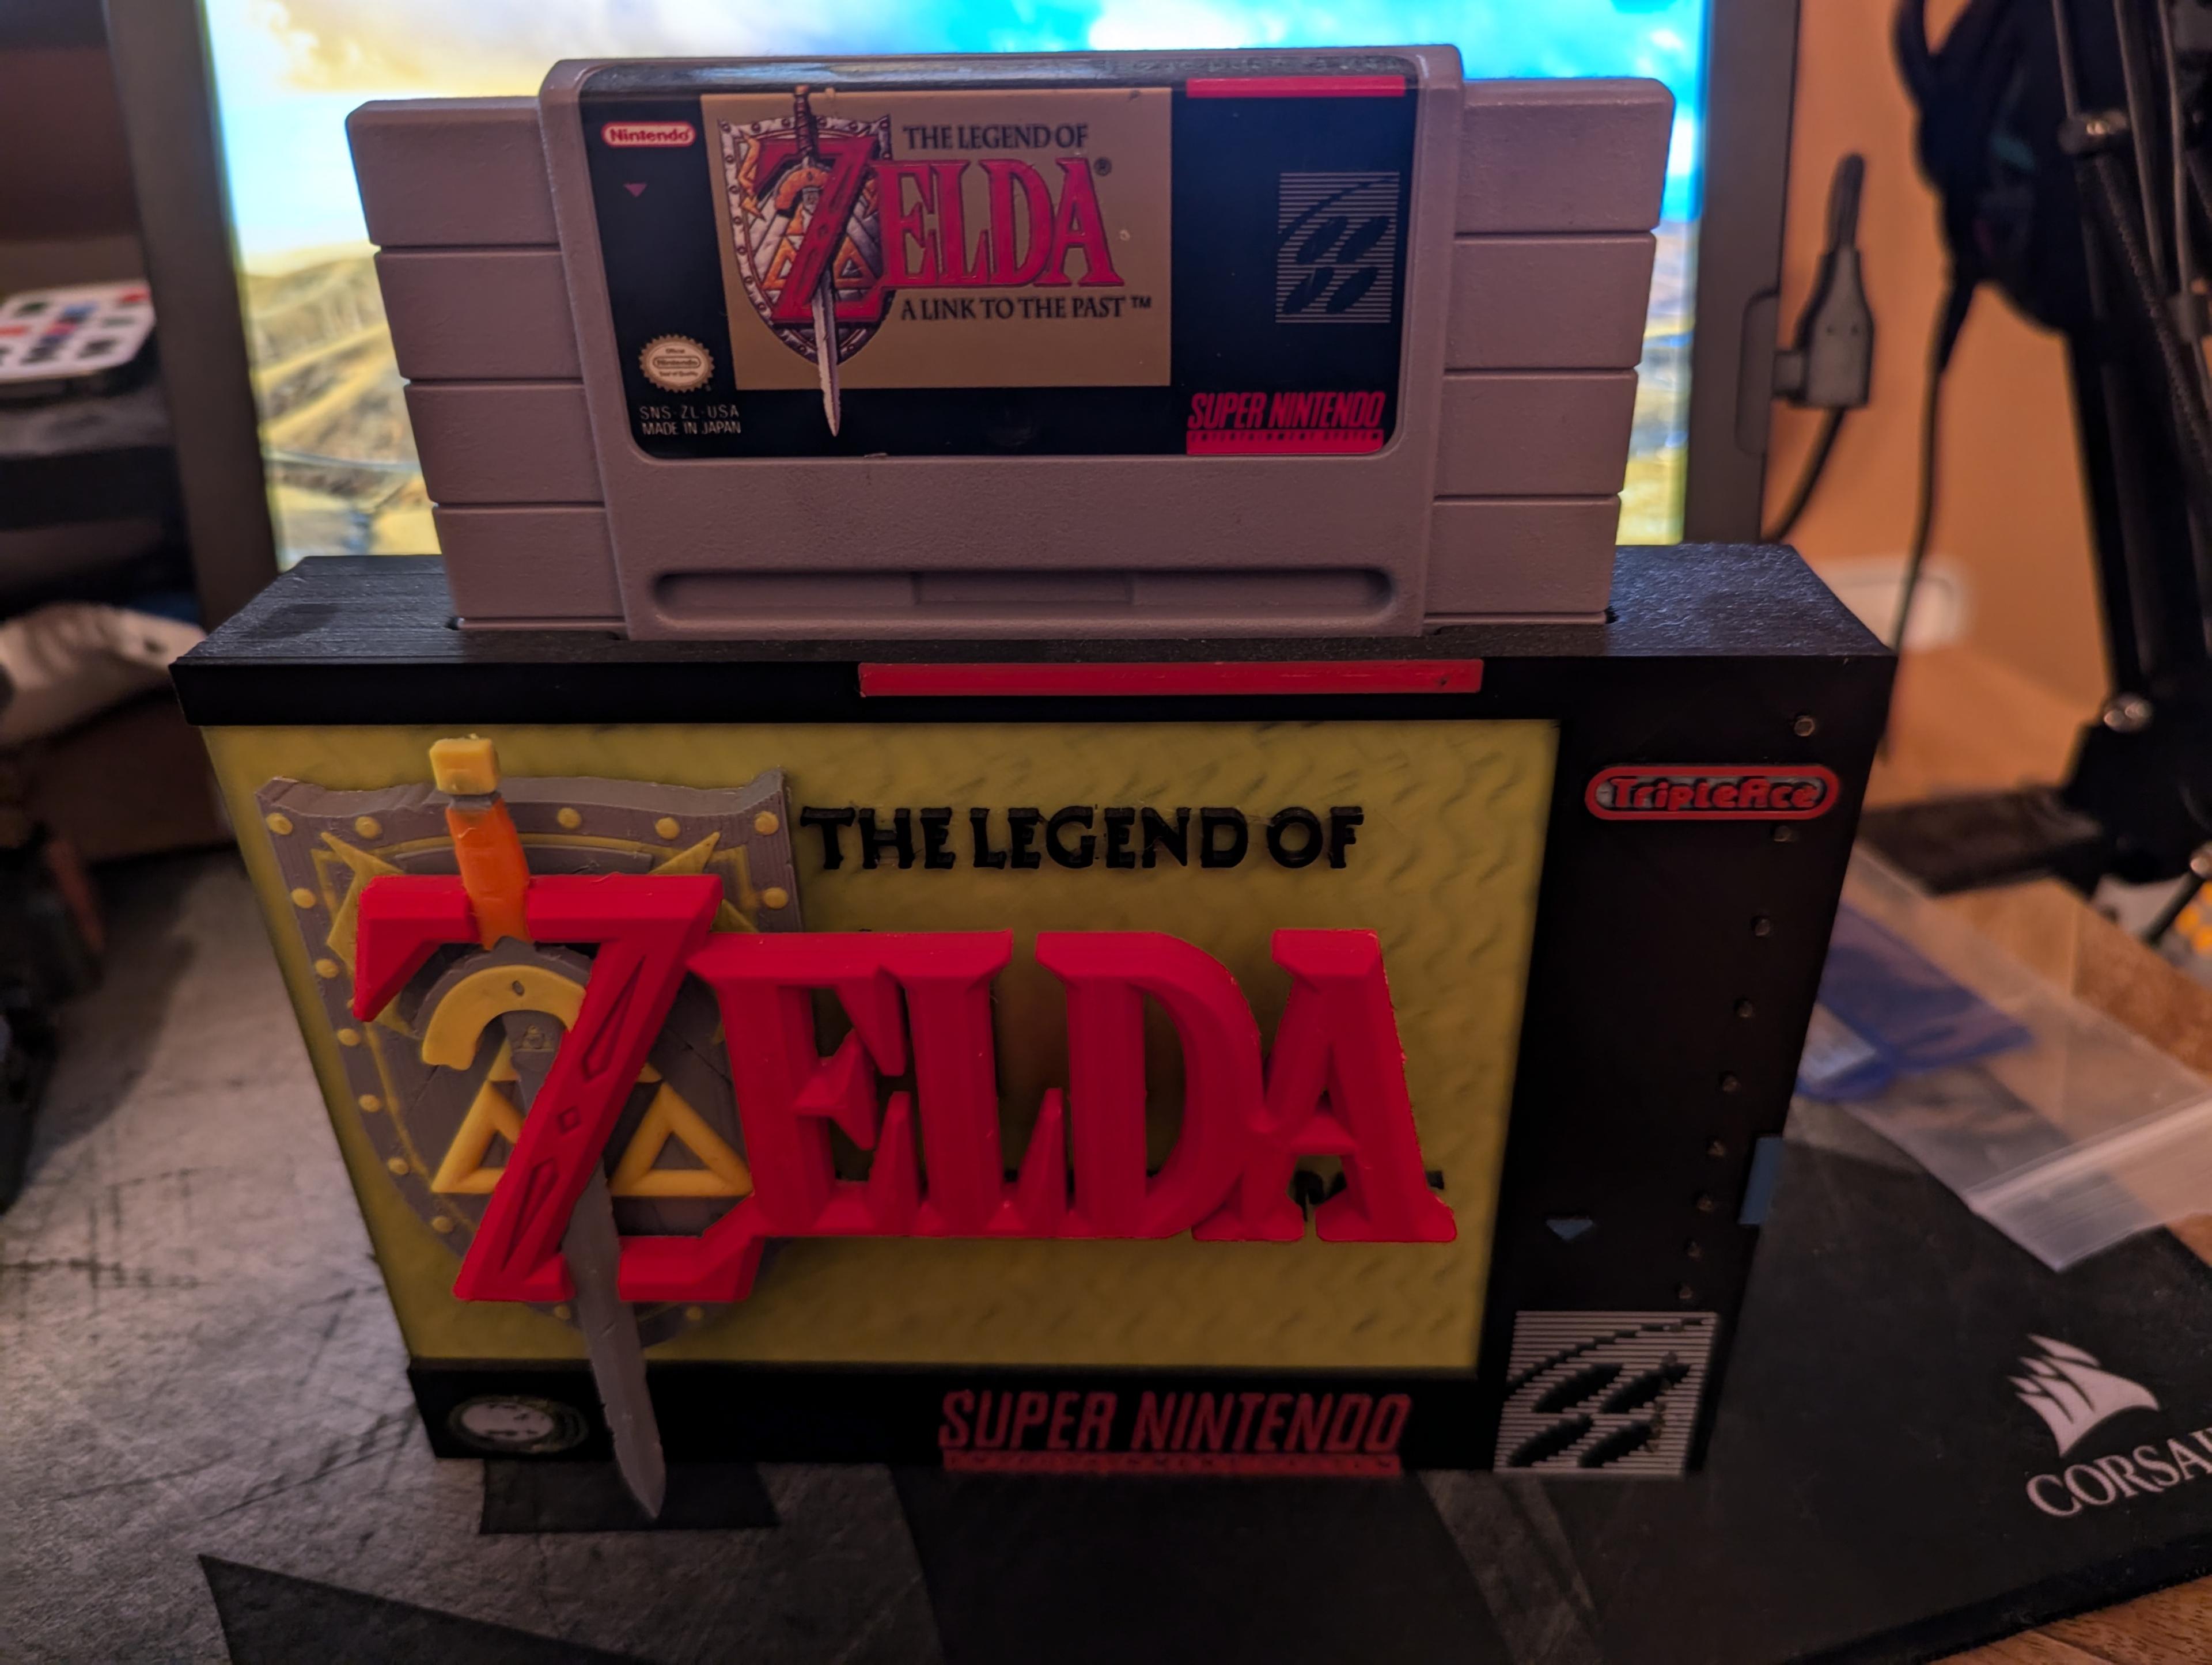 "The Legend of Zelda: A Link to the Past" Cartridge Display 3d model